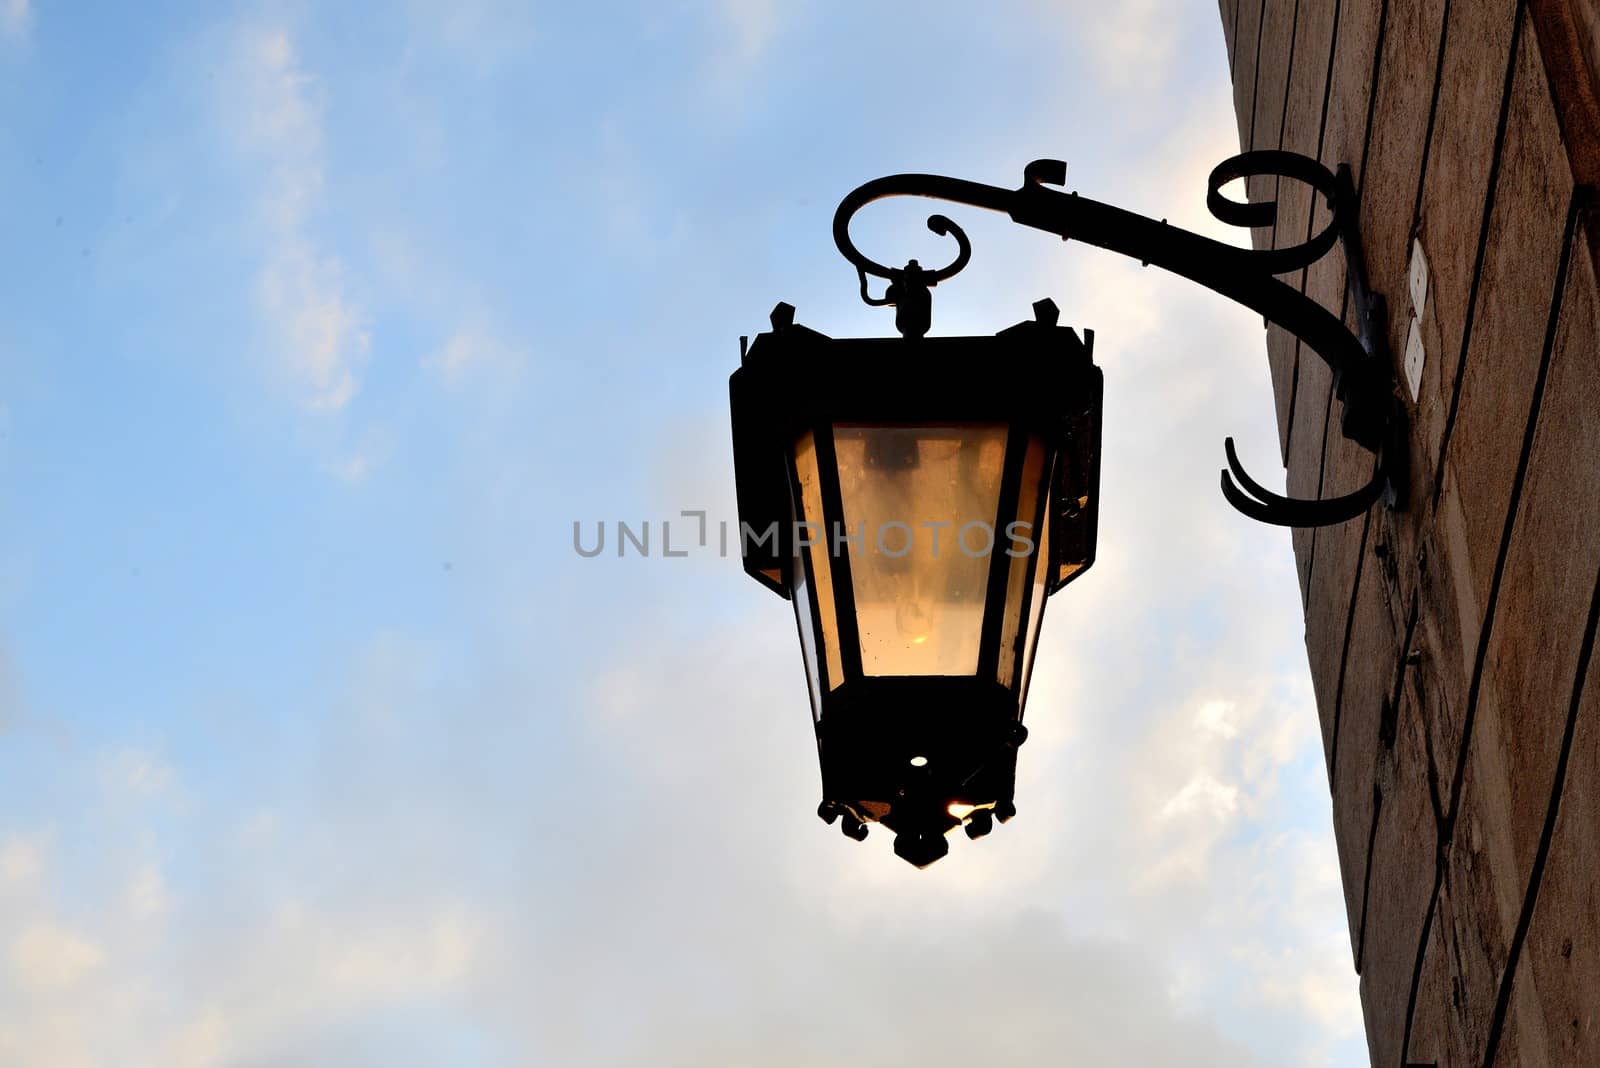 Old street lamp in Lublin illuminated by the sun